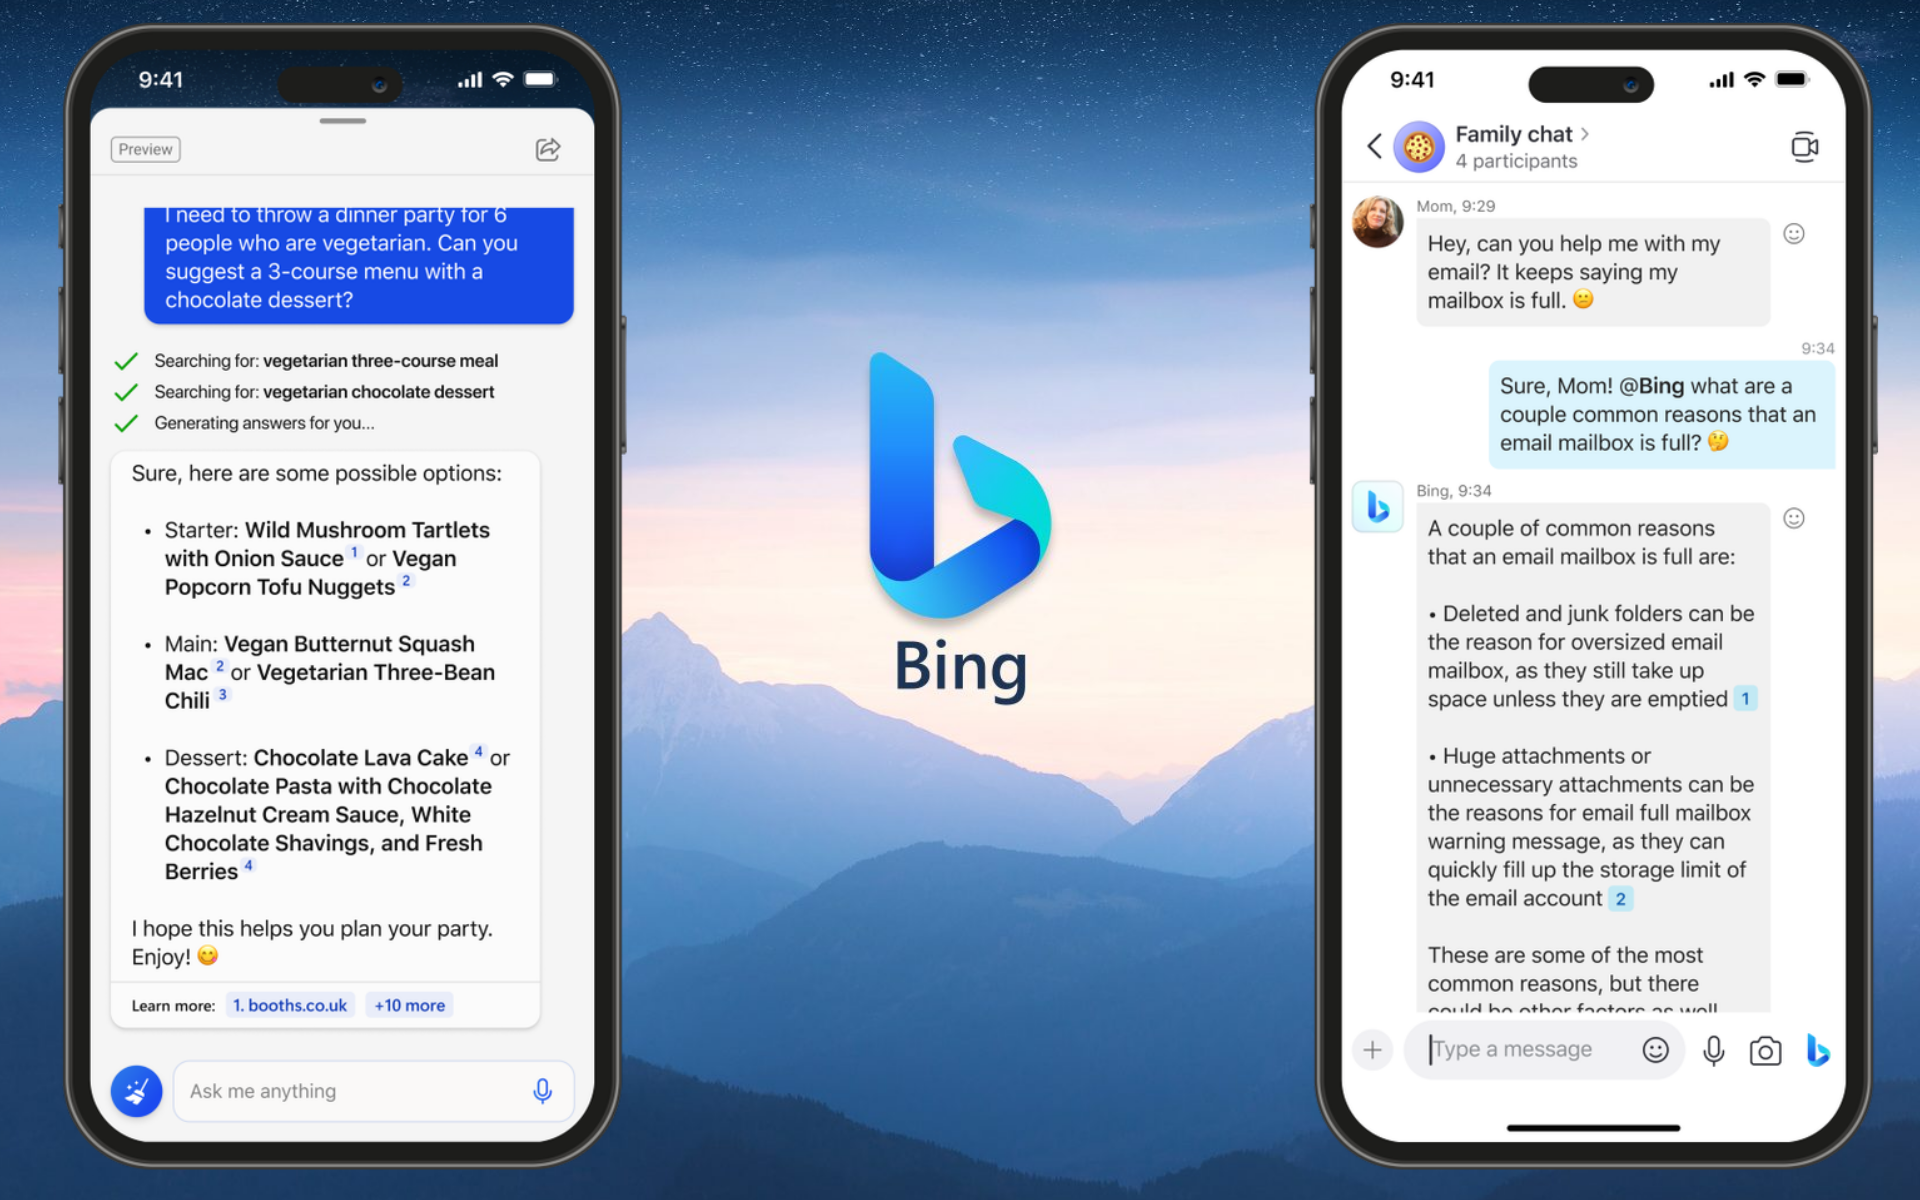 How to use Bing on Edge and Skype mobile